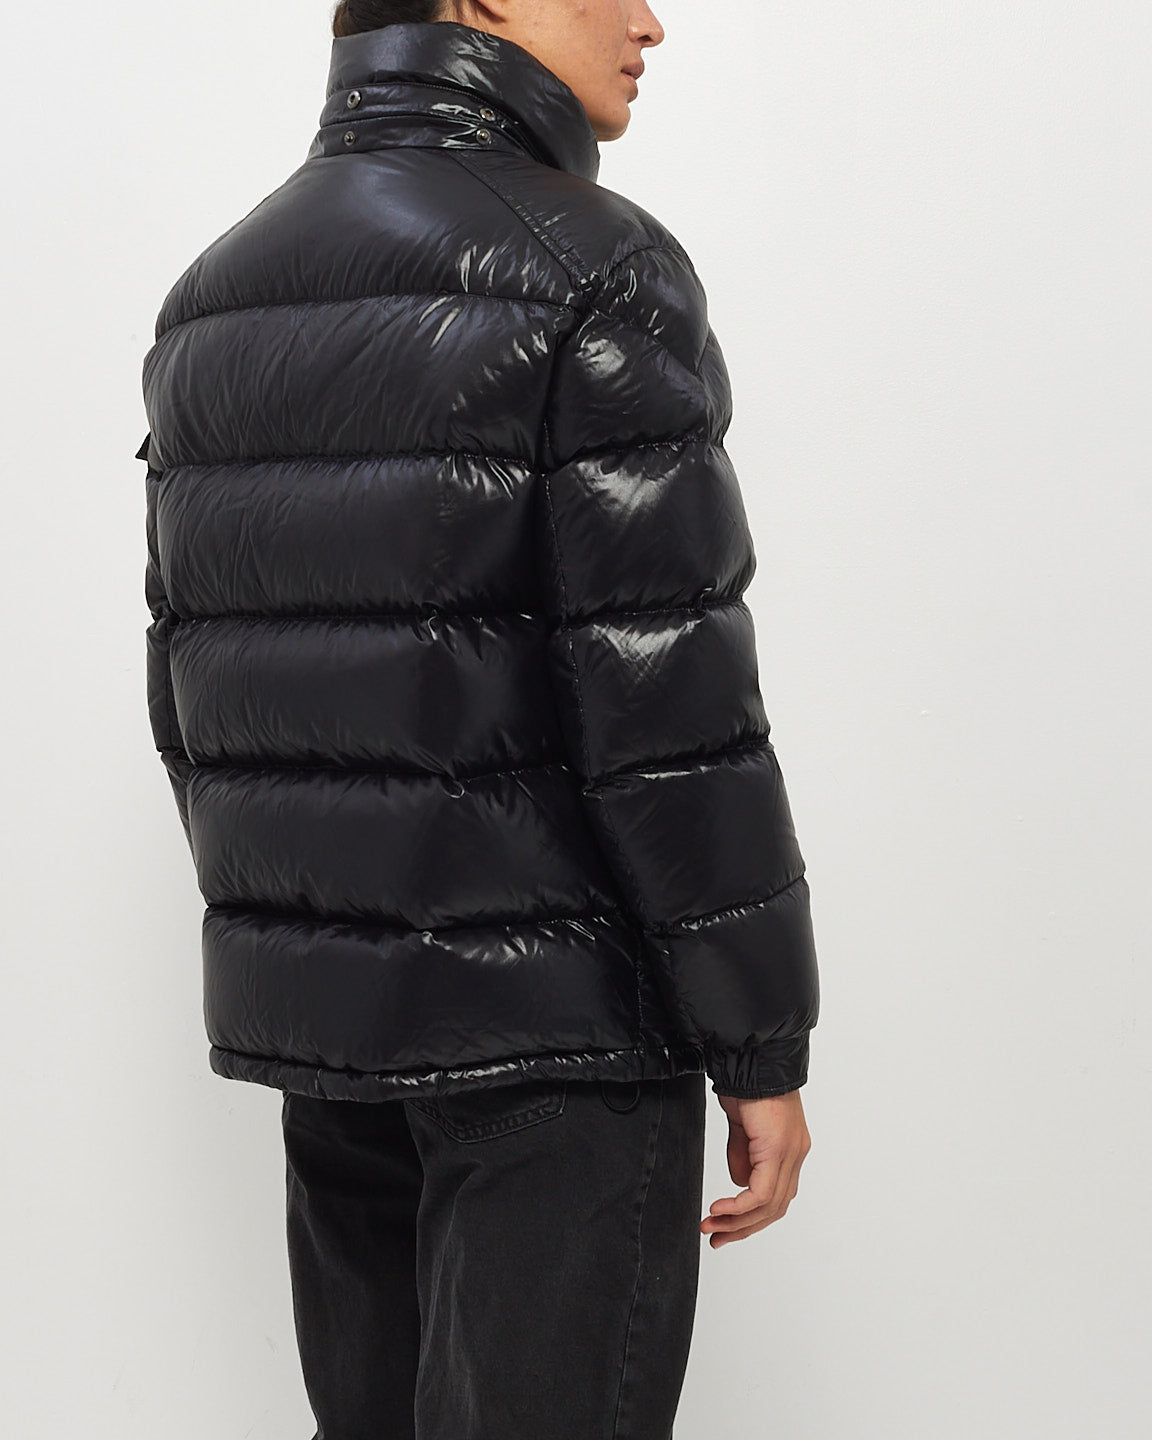 Moncler Black Down Maire Puffer Jacket - 2